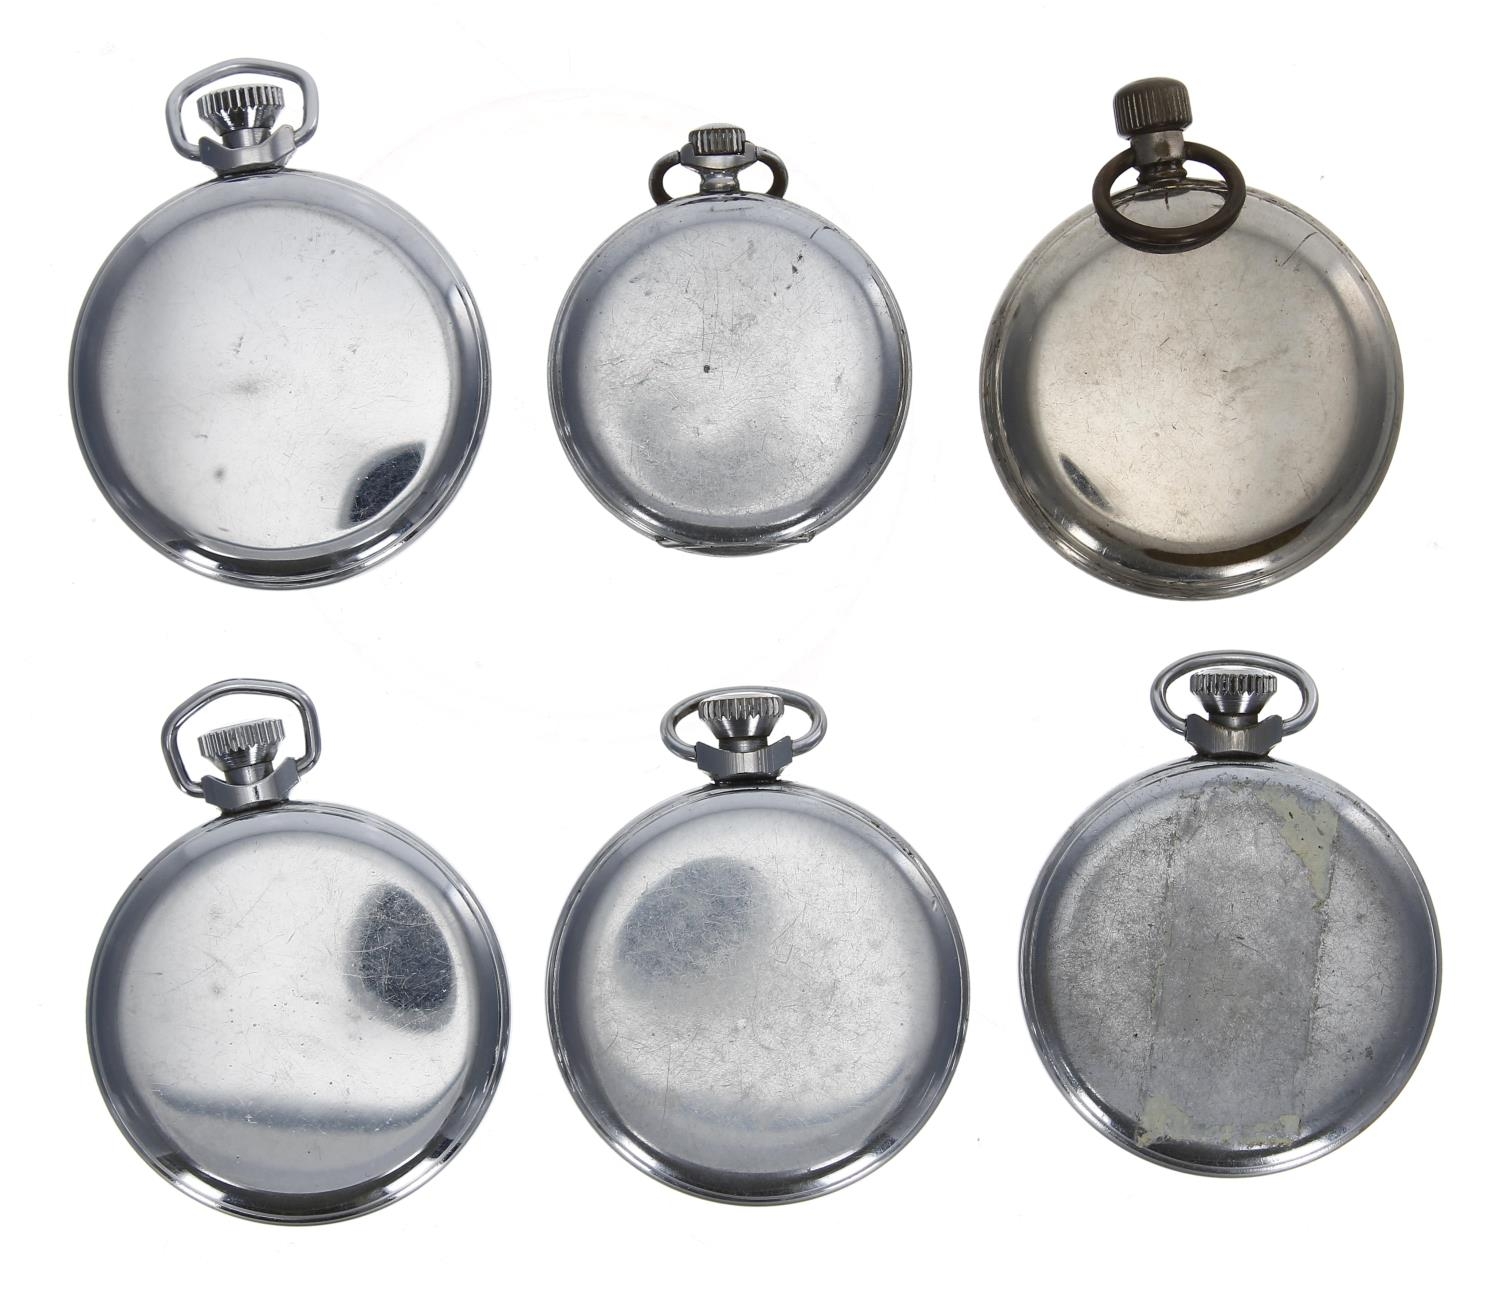 Six Ingersoll chrome cased pocket watches to include two Ingersoll Triumph, Ingersoll Defiance and - Image 2 of 2